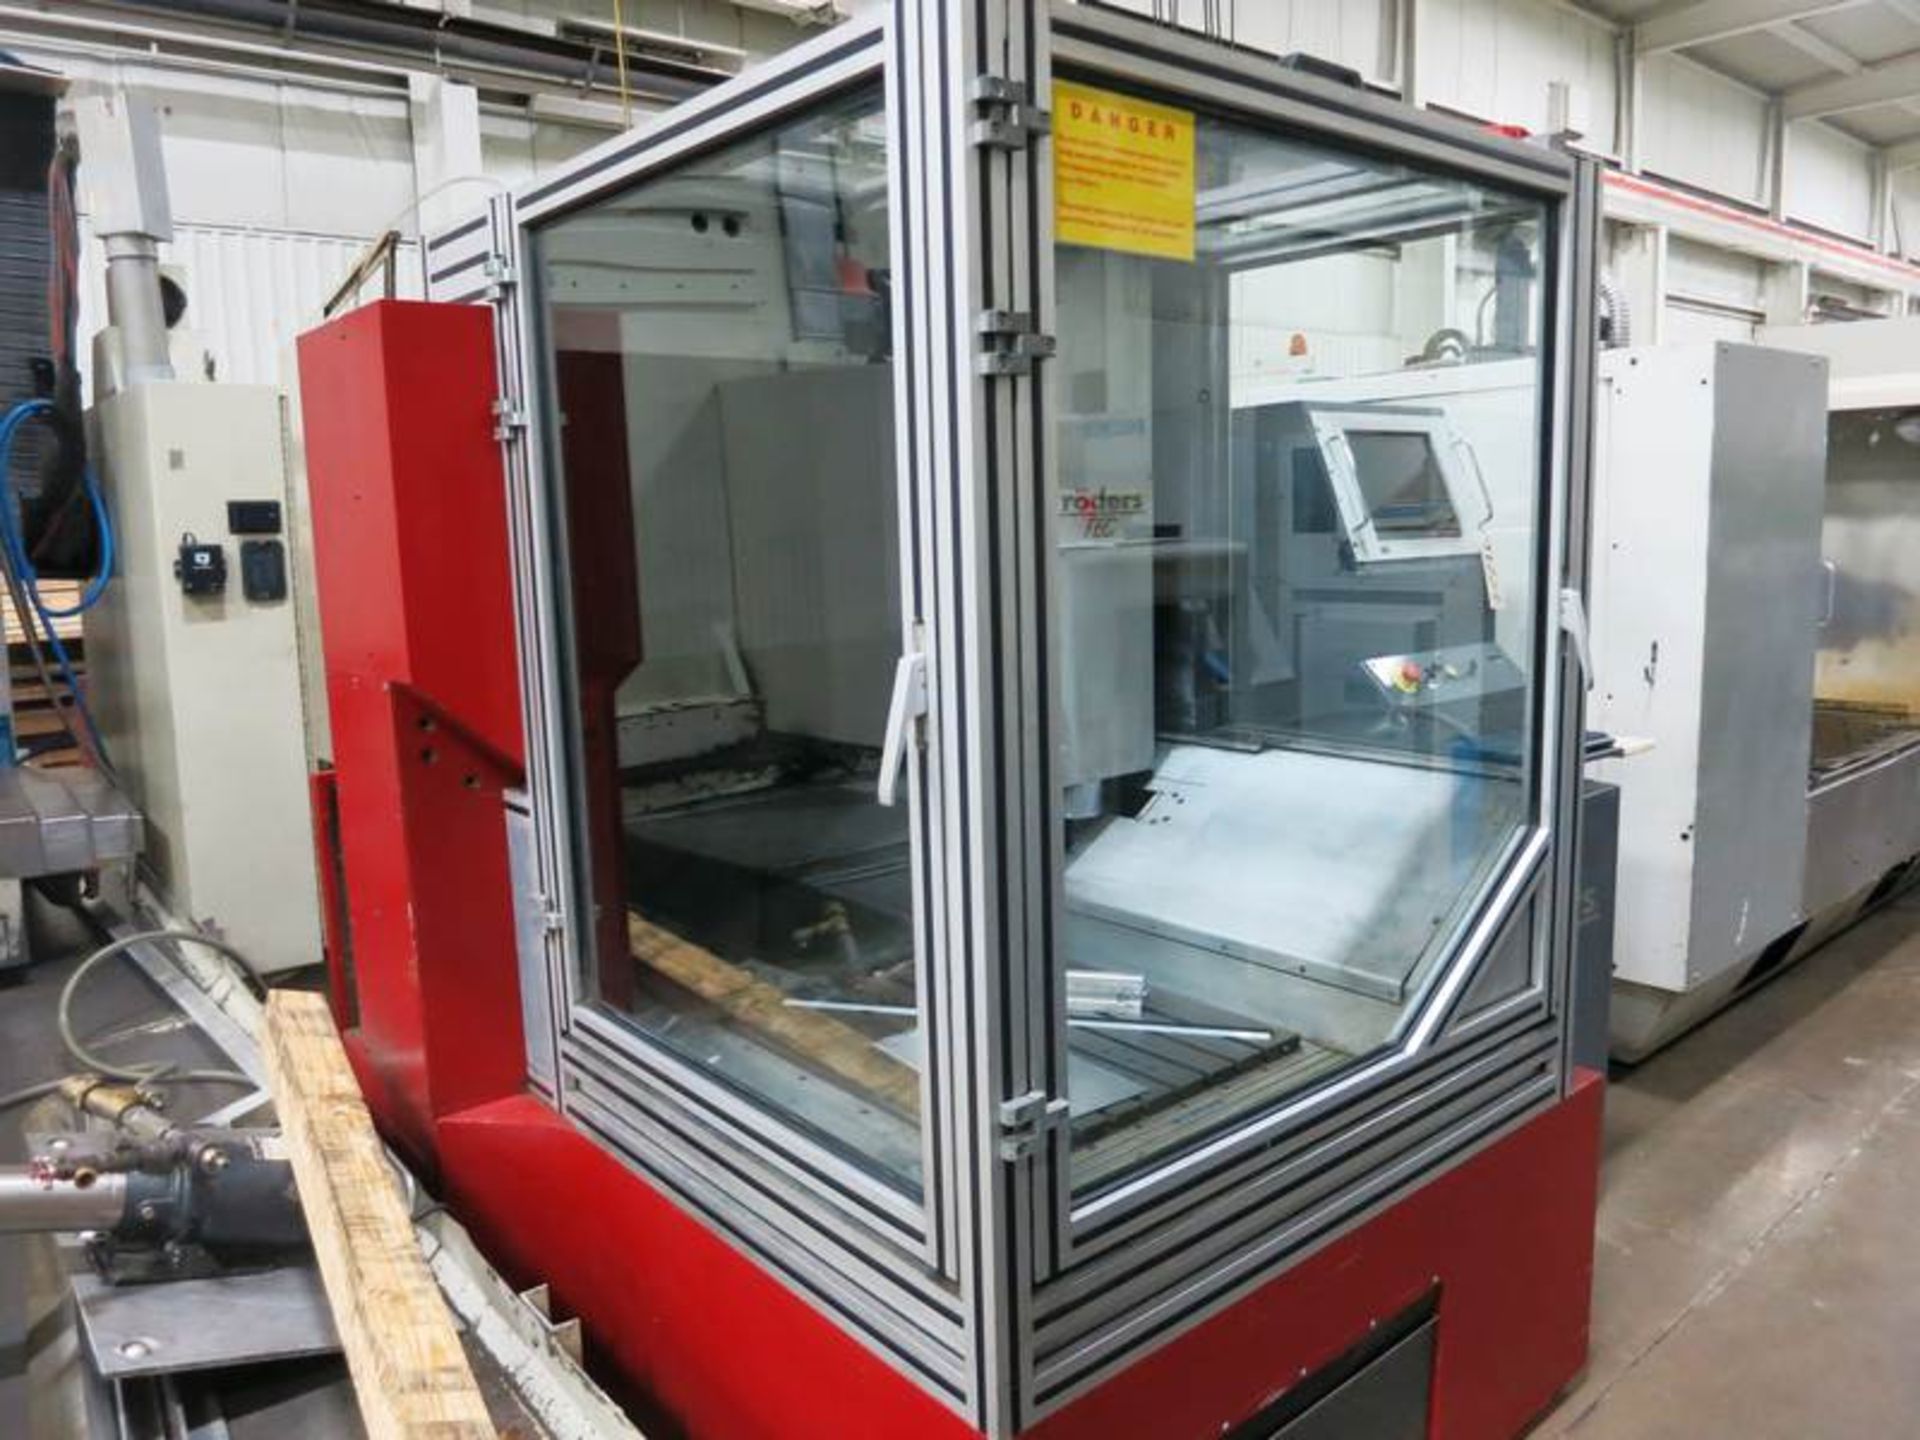 Roders TEC RFM 600 CNC 3-Axis High speed Vertical Machining Center, S/N 87995-43, New 1998 General - Image 3 of 9